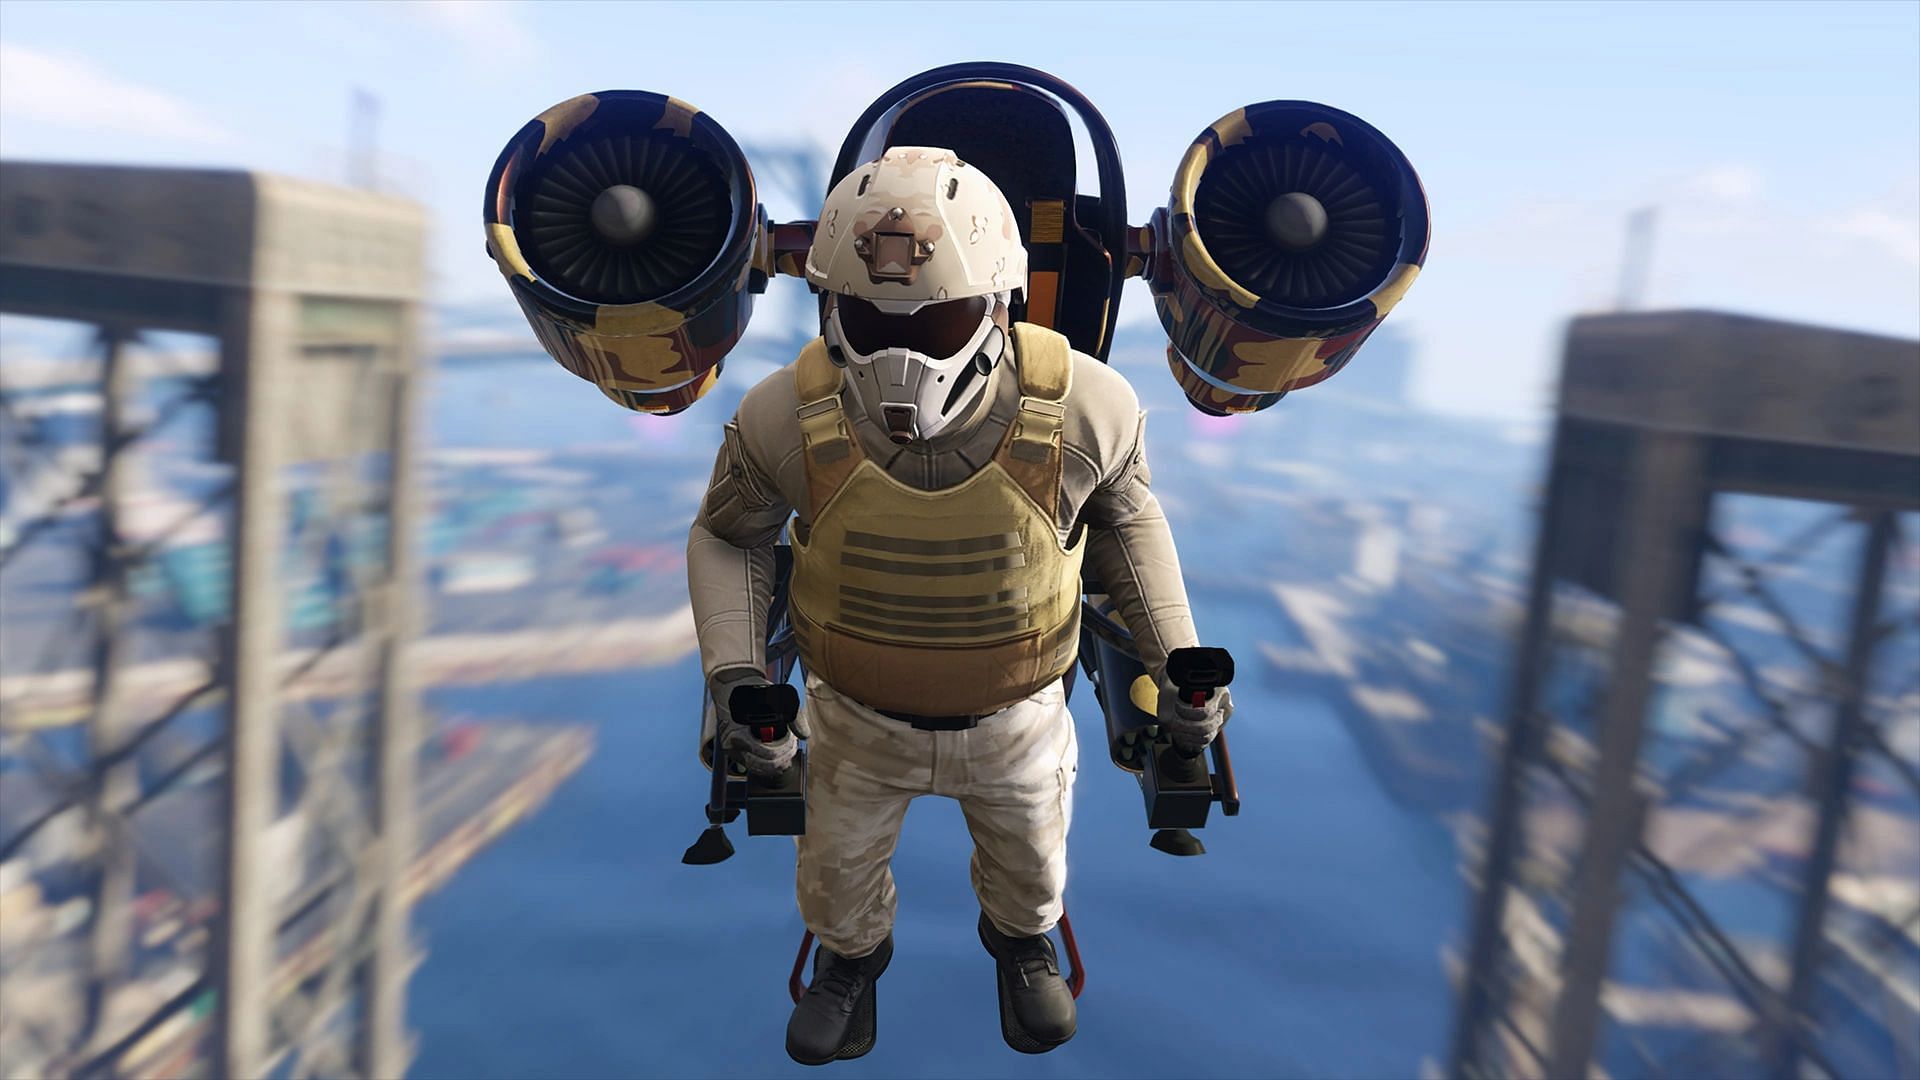 GTA Online is divisive amongst the community, partially because of its sci-fi vehicles and weaponry (Image via Rockstar Games)